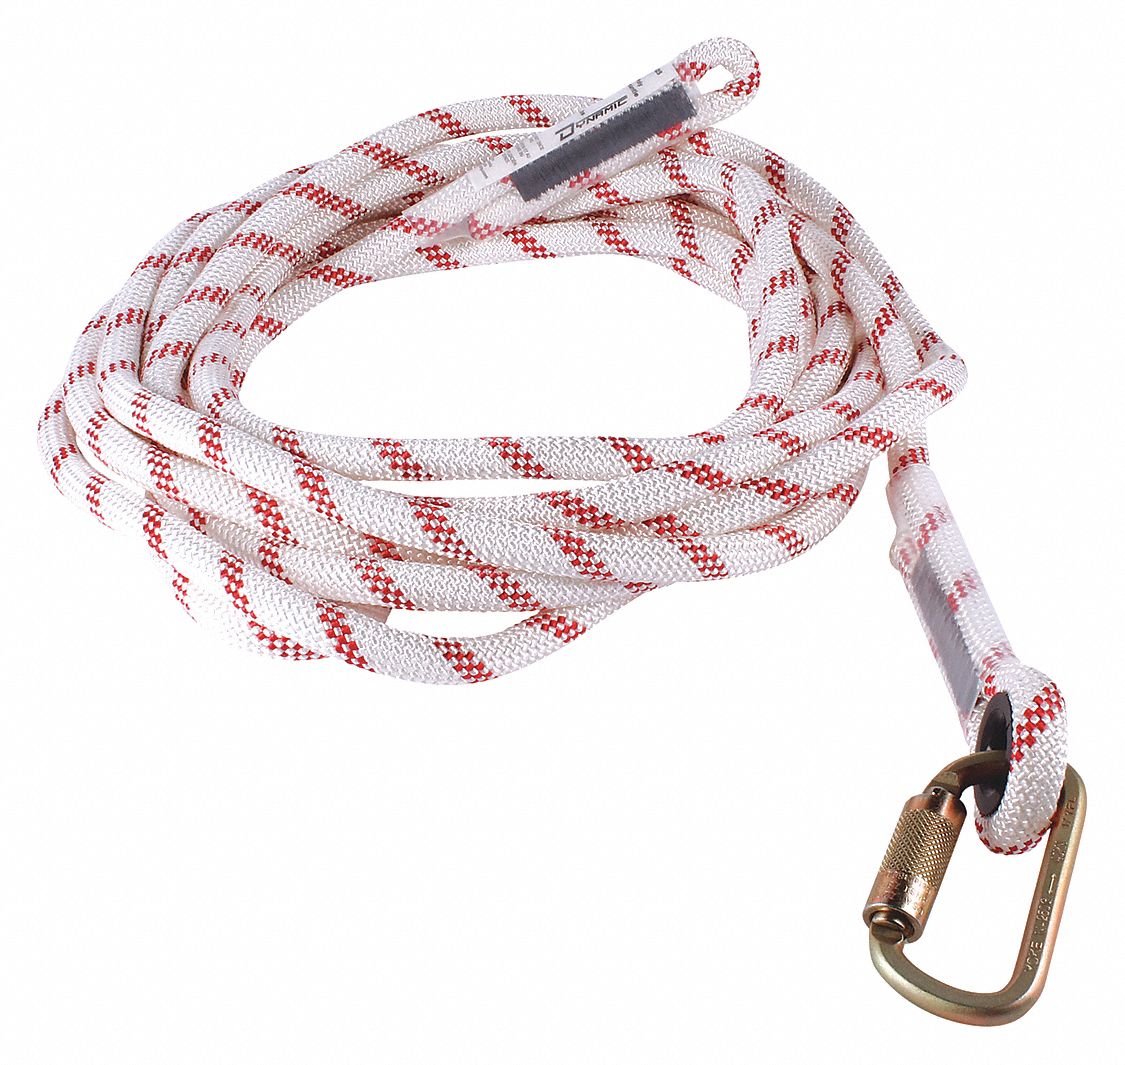 KERNMANTLE ROPE, FOR USE WITH FP151 OR FP131 ROPE GRAB, CARABINER, 1  WORKER, 100 FT, STEEL